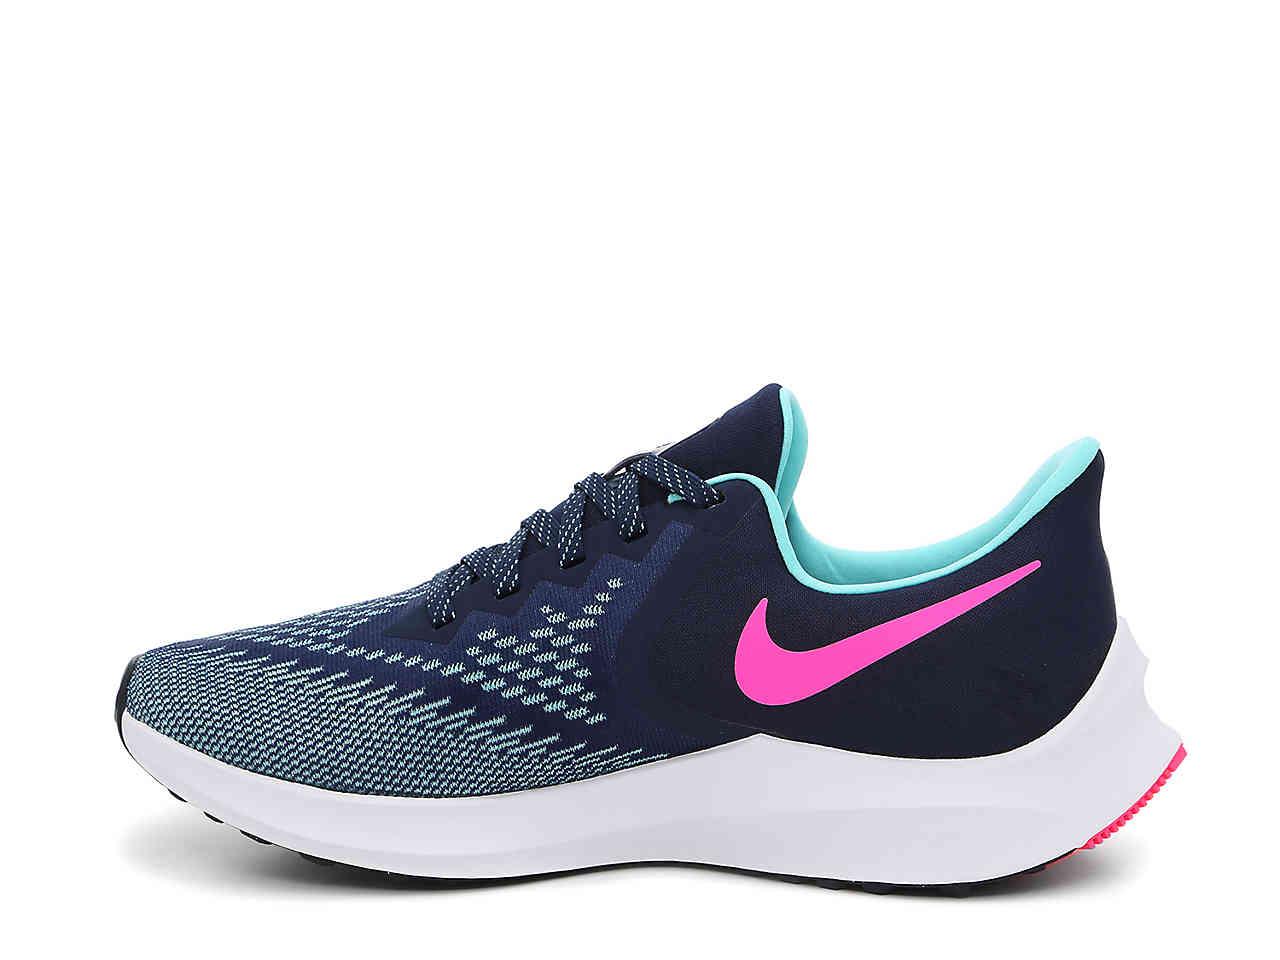 Nike Zoom Winflo 6 Running Shoes in Navy/Pink/Mint (Blue) | Lyst